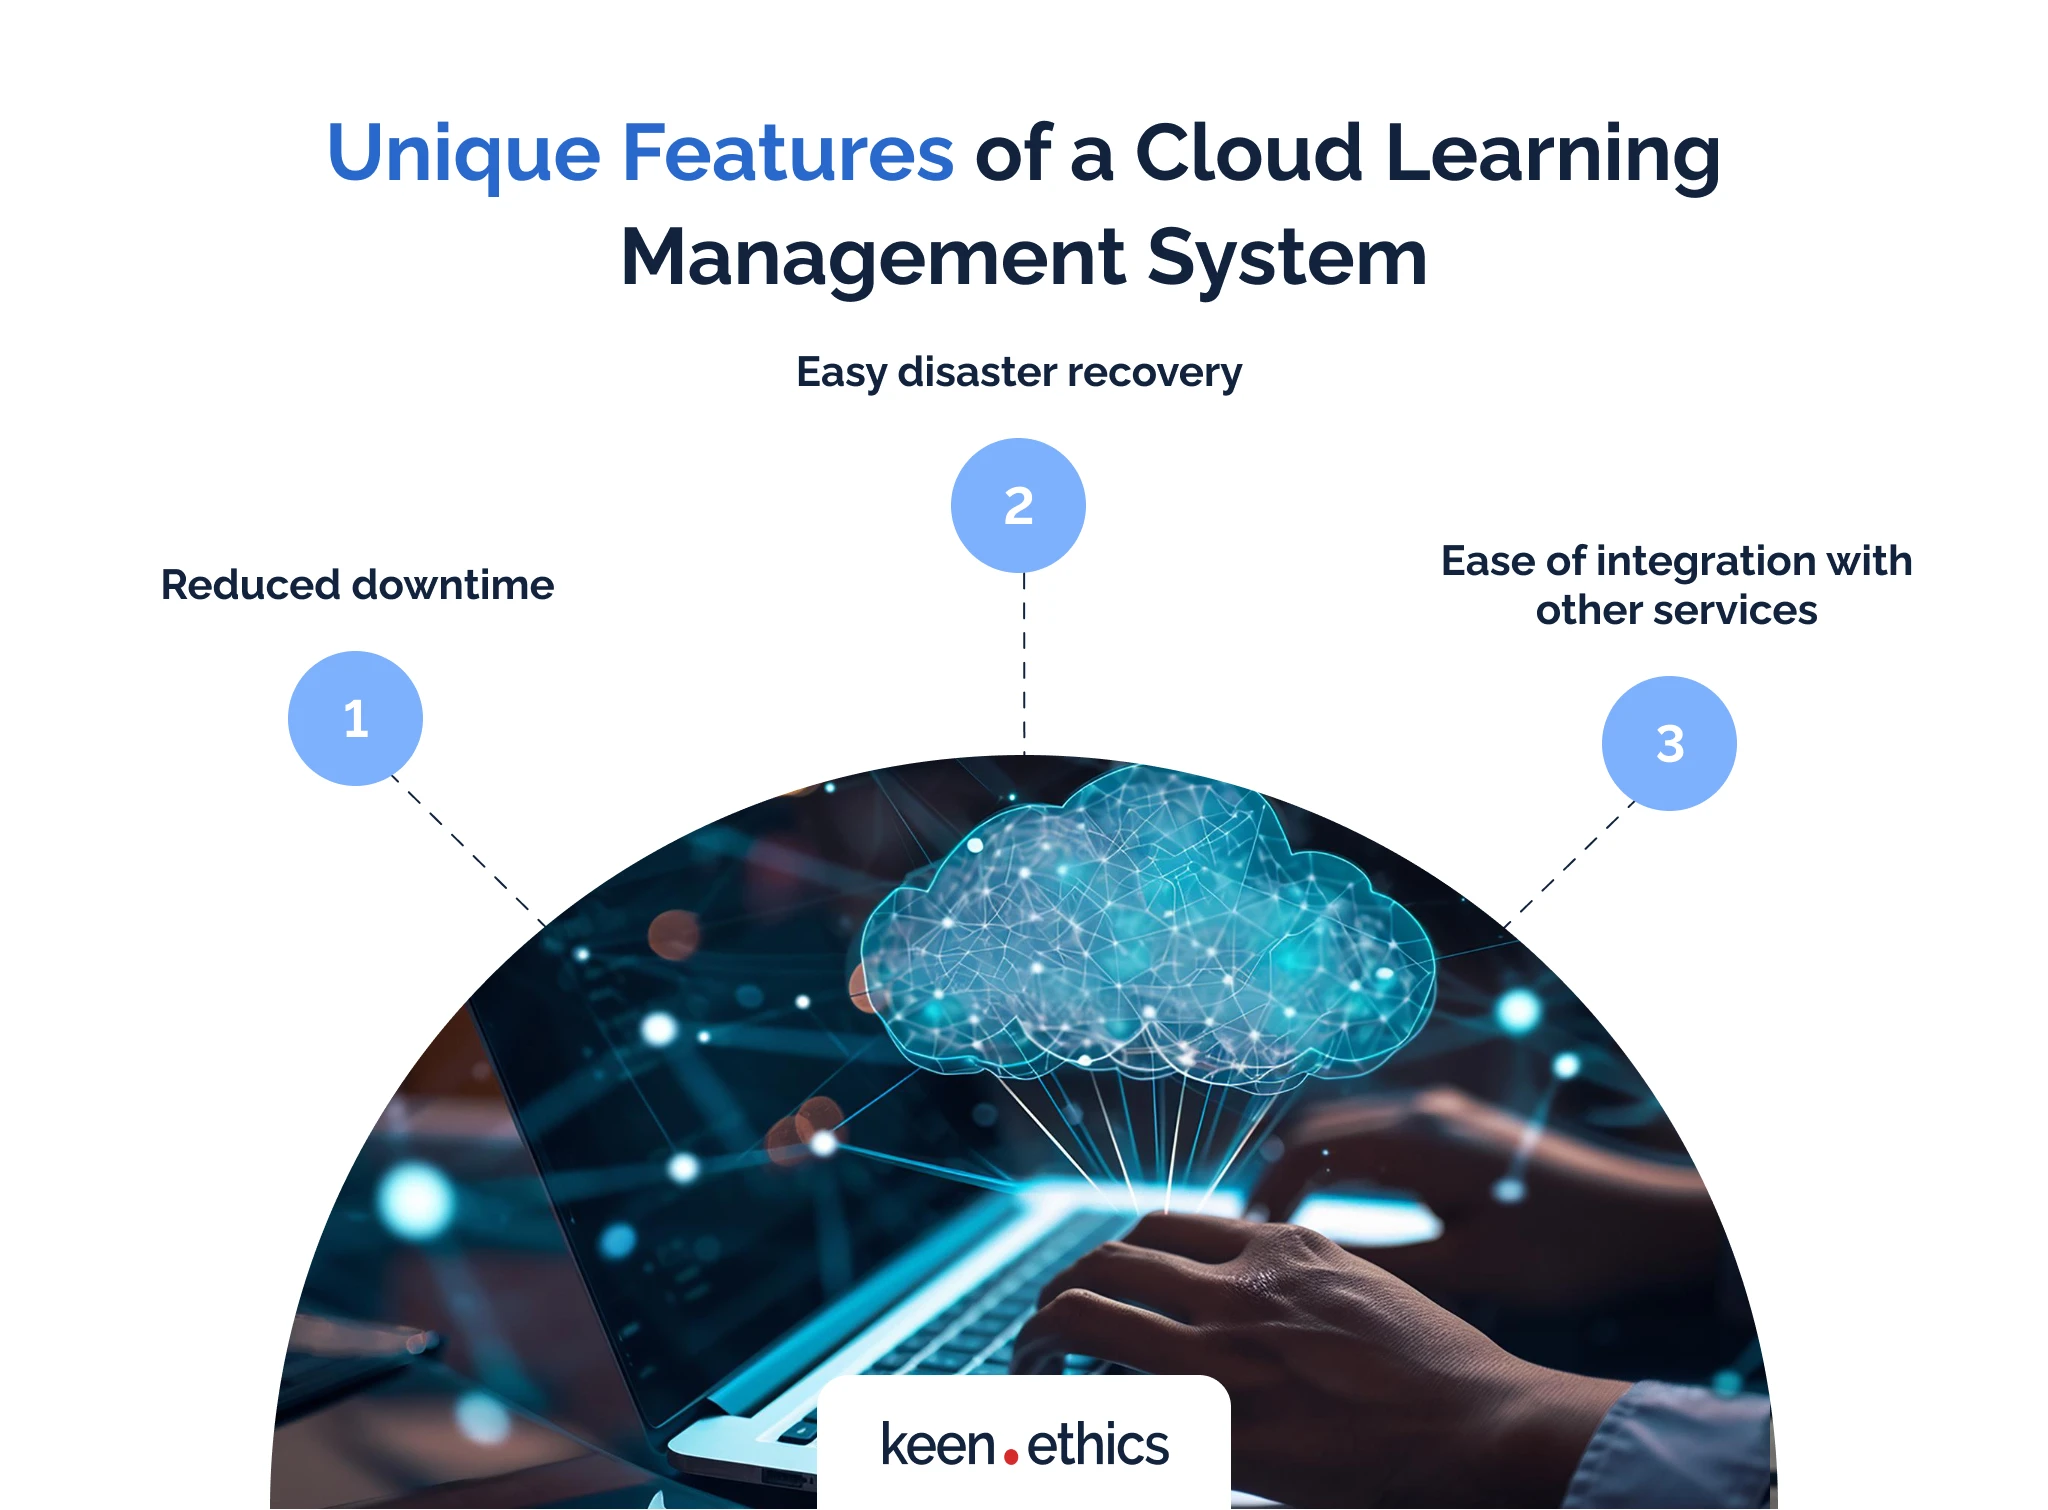 Unique features of a cloud learning management system